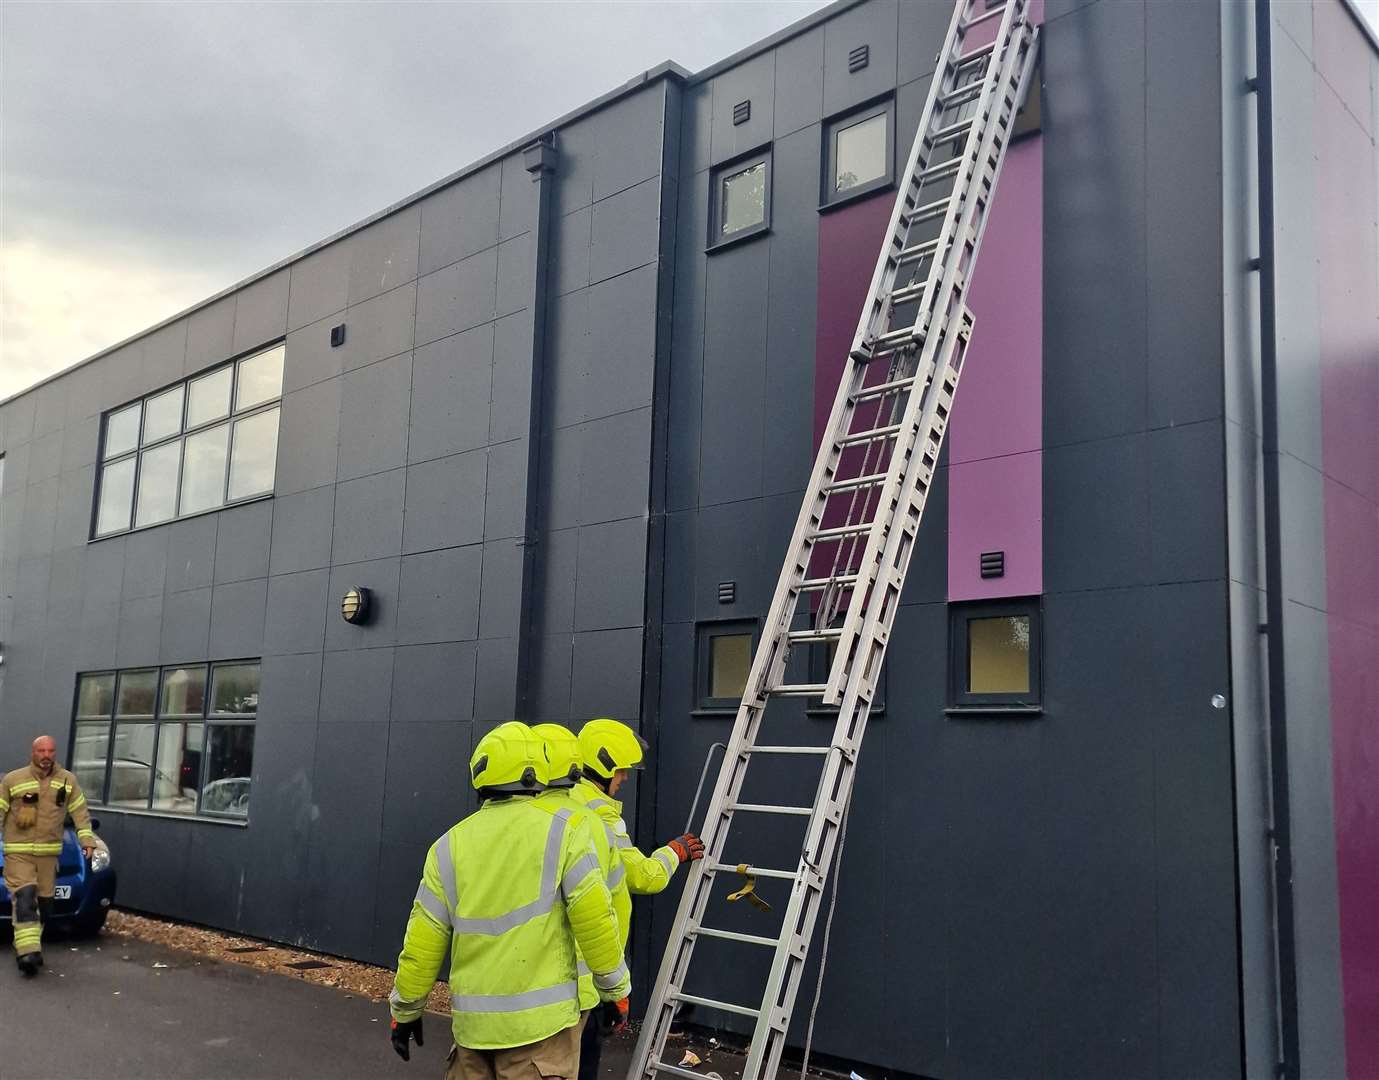 Firefighters tried to rescue Hemlock from the top of a science building block at Mayfield Grammar School in Pelham Road, Gravesend